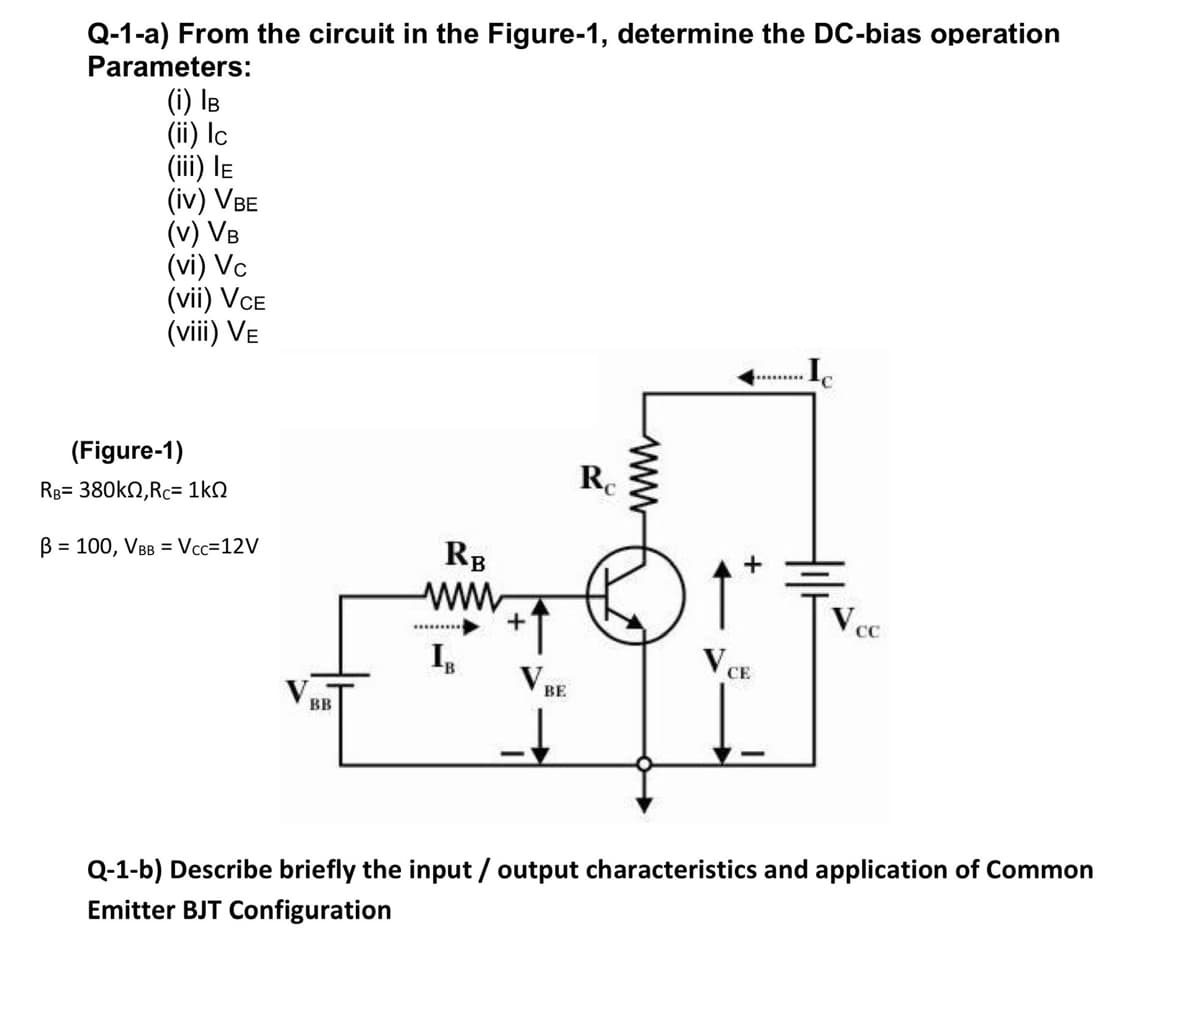 Q-1-a) From the circuit in the Figure-1, determine the DC-bias operation
Parameters:
(i) IB
(ii) Ic
(iii) le
(iv) VBE
(v) VB
(vi) Vc
(vii) VCE
(viii) Ve
(Figure-1)
Rg= 380kN,Rc= 1kQ
B = 100, VBB = Vcc=12V
RB
ww.
+
BE
BB
Q-1-b) Describe briefly the input / output characteristics and application of Common
Emitter BJT Configuration
ww
